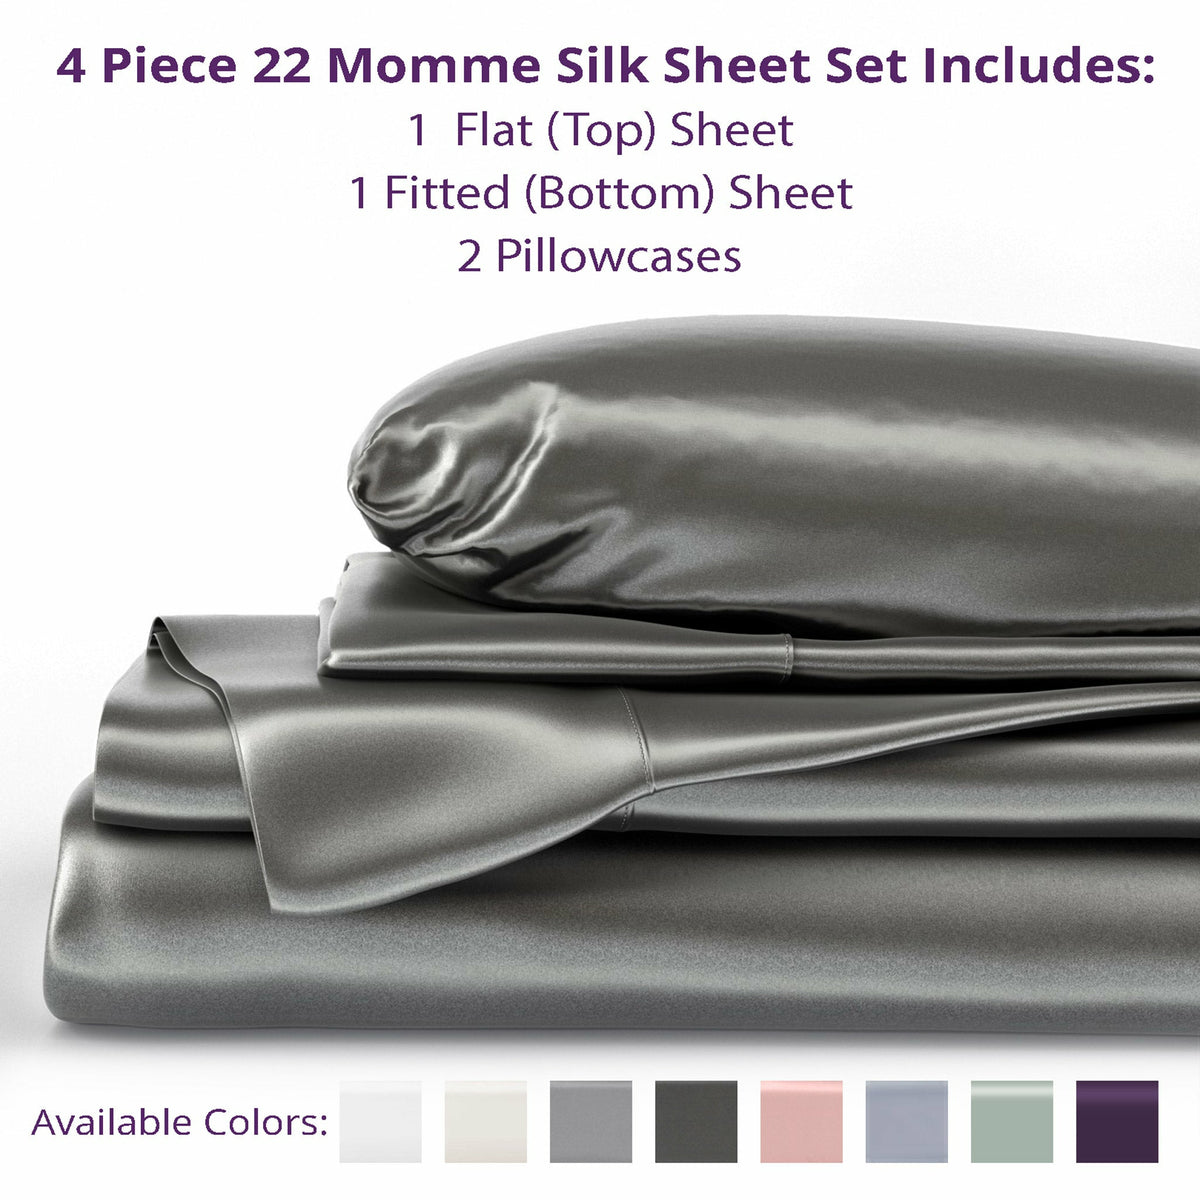 Mulberry Park Silks 22 Momme Silk Fitted Sheets Inclusions Gunmetal Fine Linens